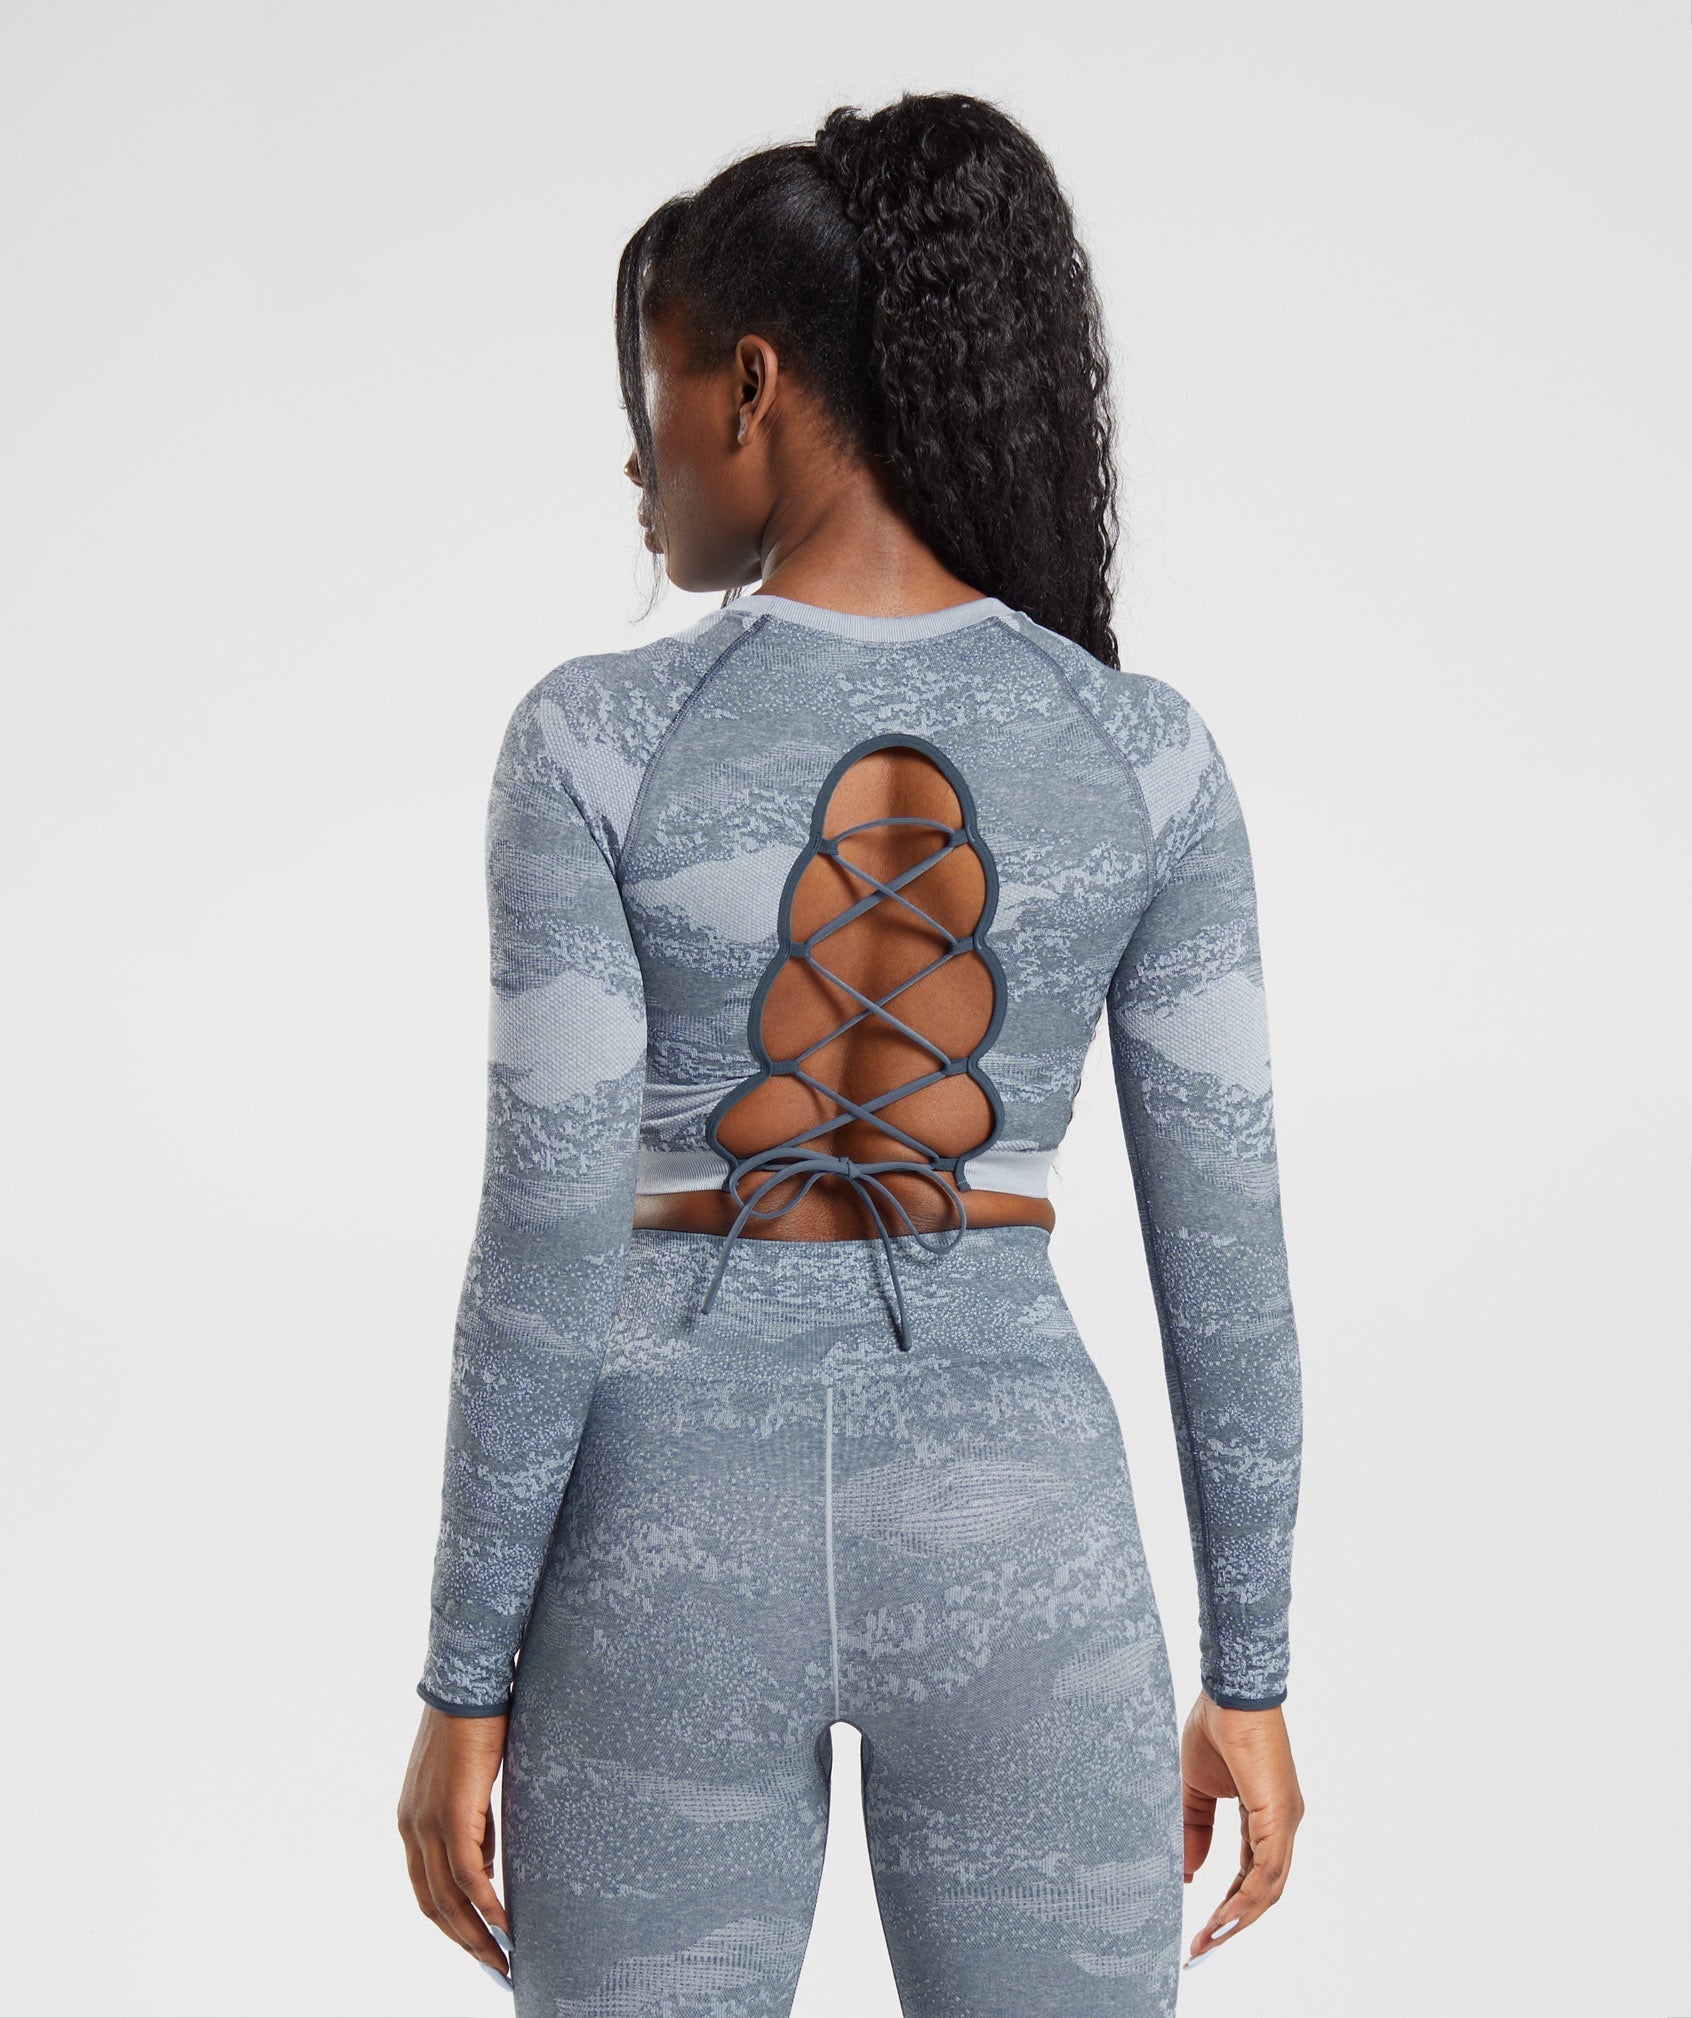 Adapt Camo Seamless Lace Up Back Top in River Stone Grey/Evening Blue - view 2